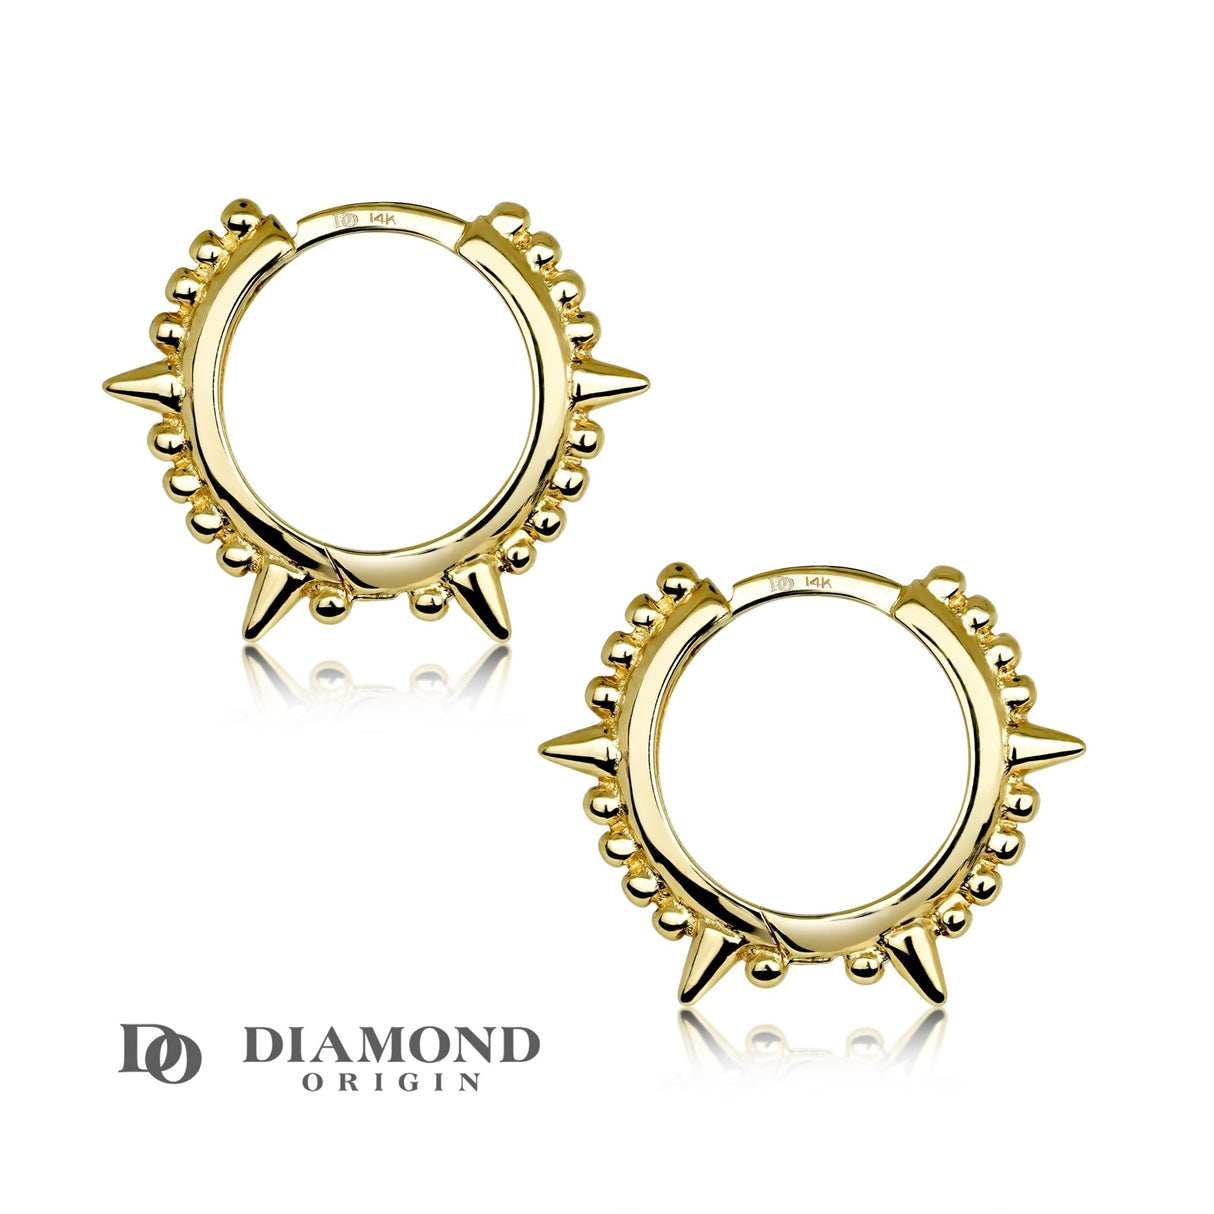 14K Gold Earrings 2023 Collection, 17mm Bead N Spike Hoop Earrings, Gold Hoop Earrings, - Diamond Origin